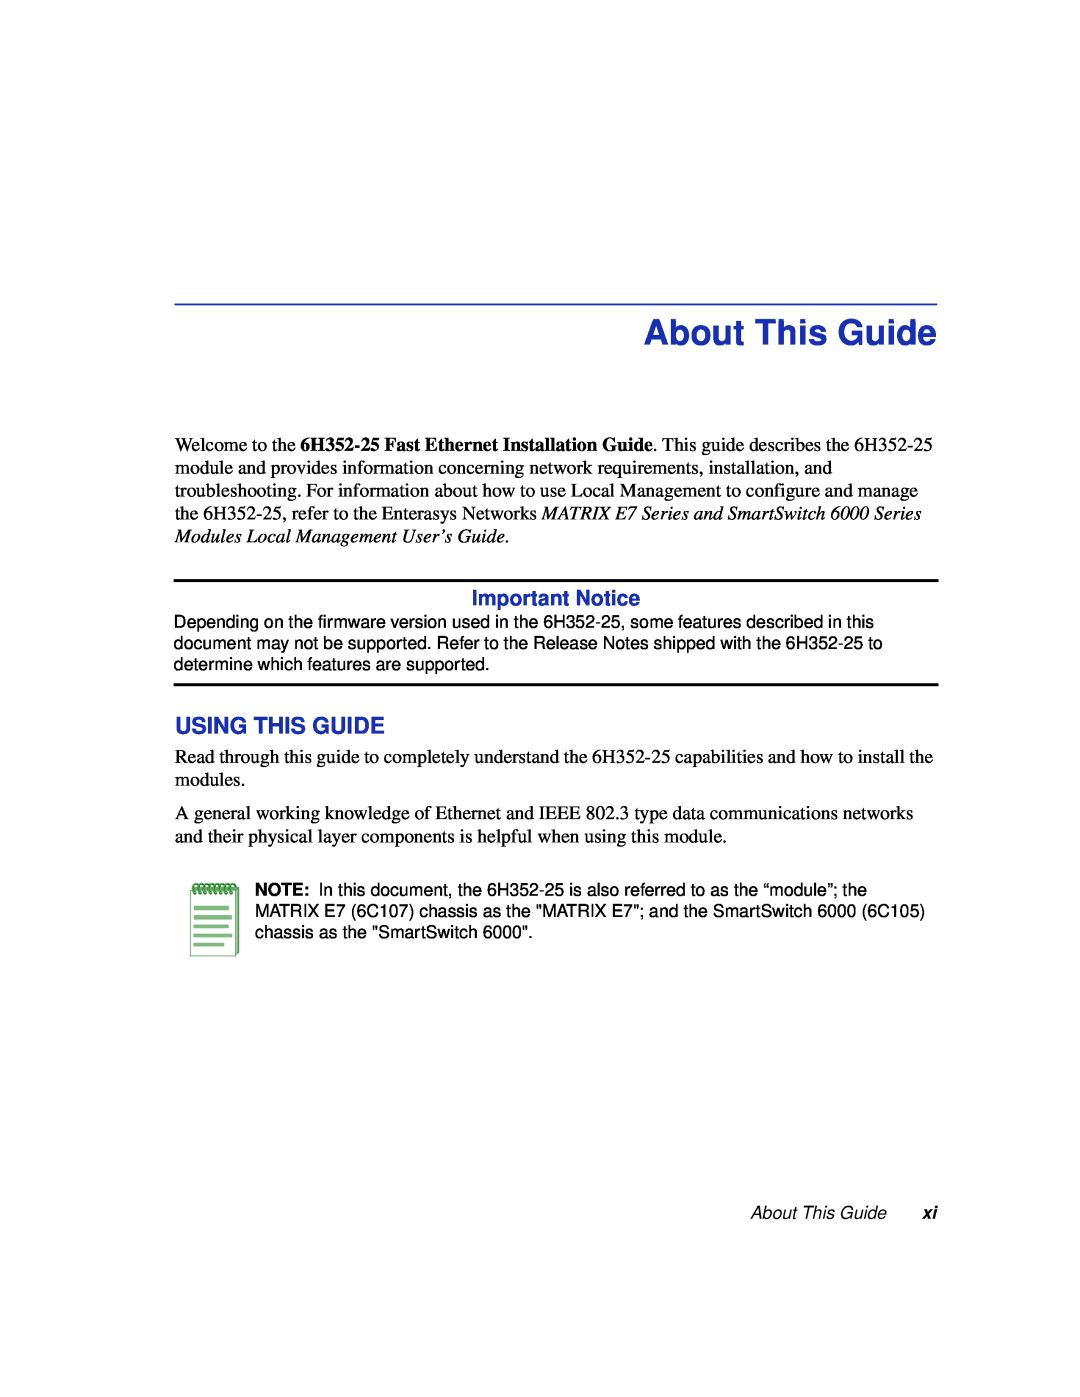 Enterasys Networks 6H352-25 manual About This Guide, Using This Guide, Important Notice 